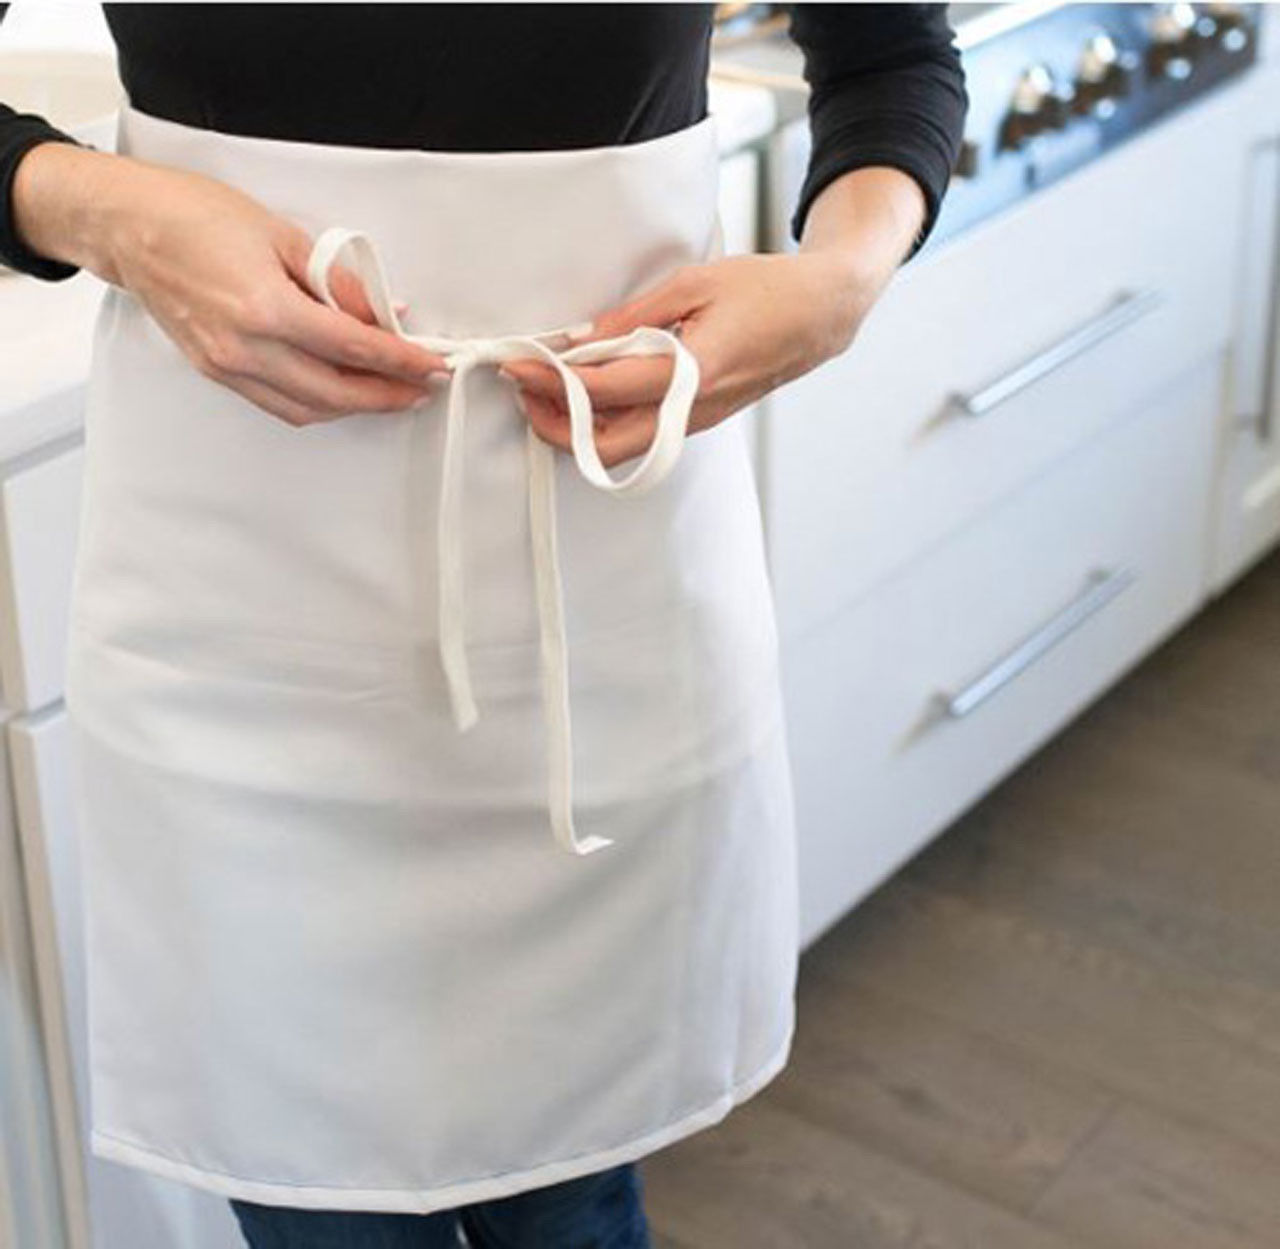 Is the 4 way apron designed to be worn in multiple styles?